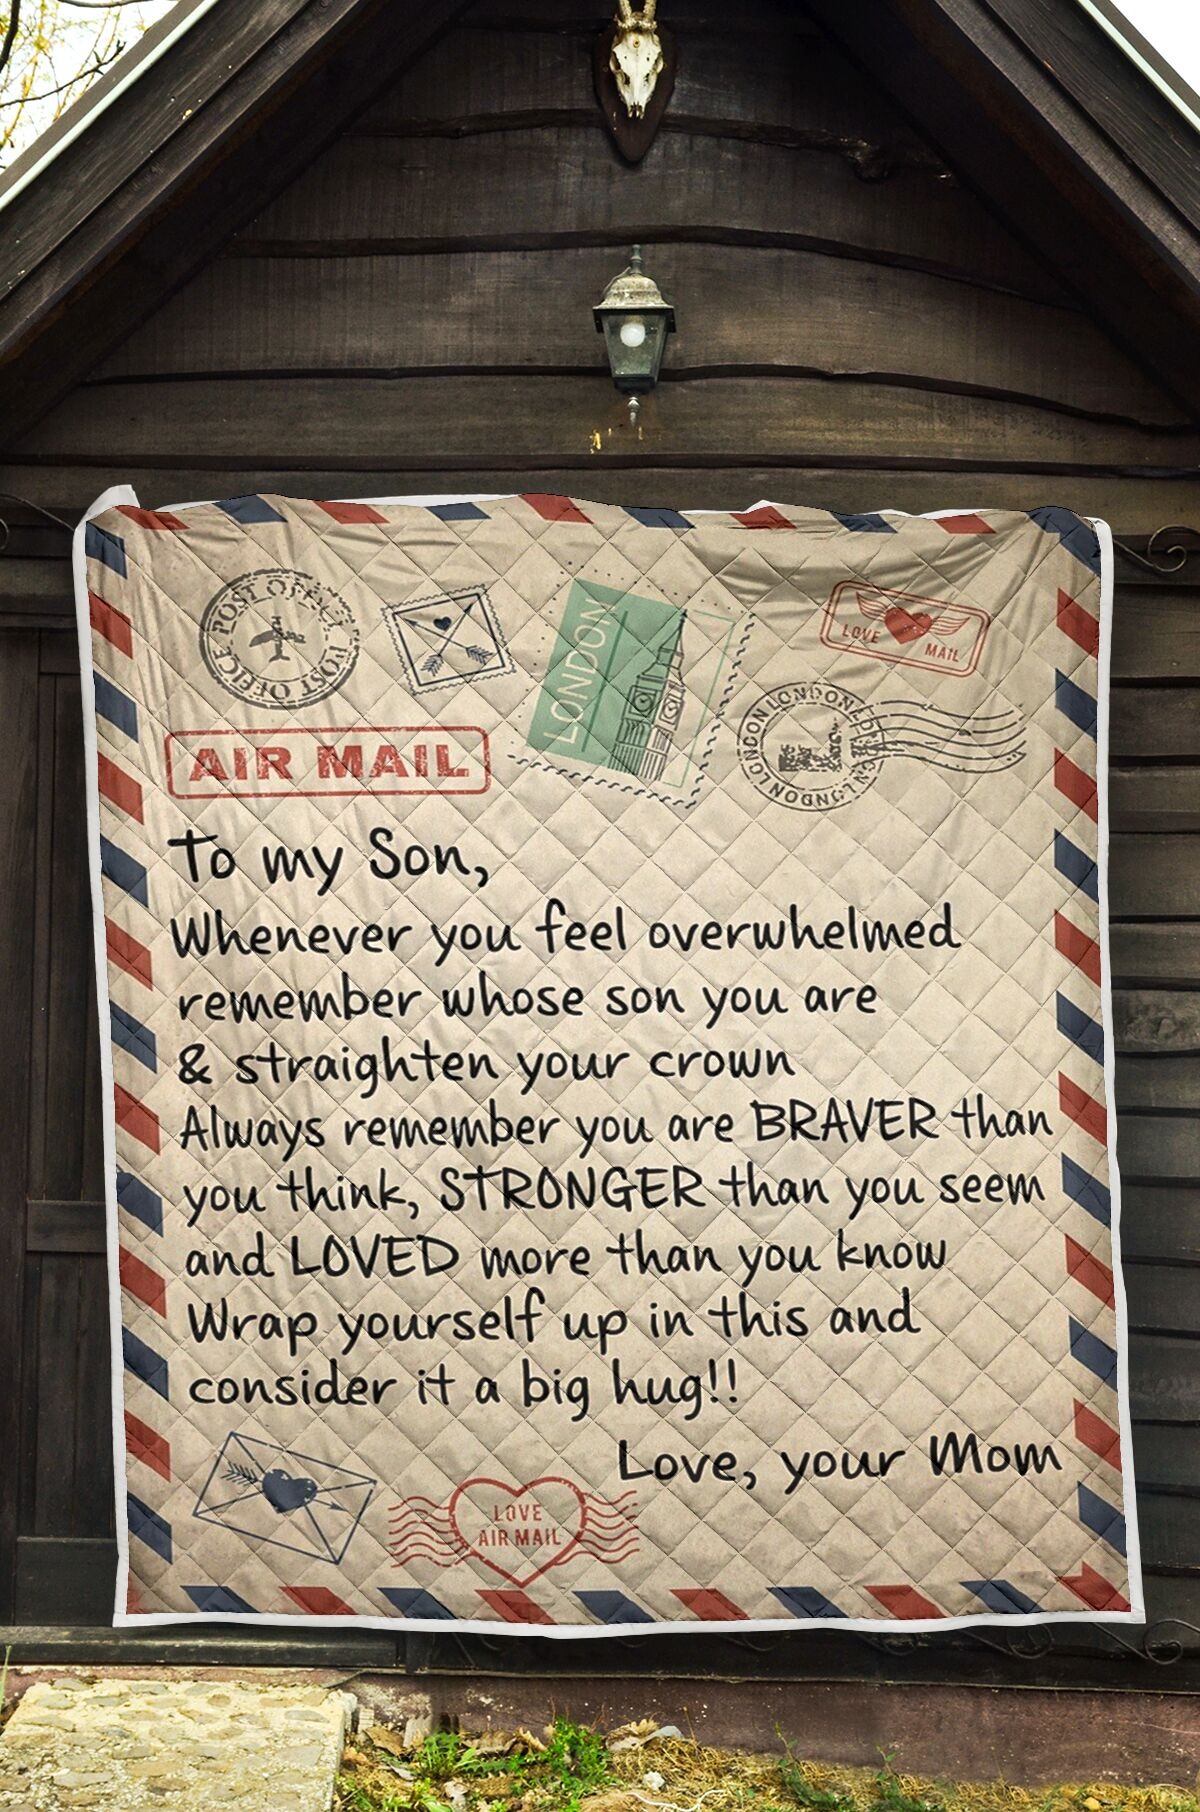 Air mail To my son whenever you feel overwhelmed blanket3